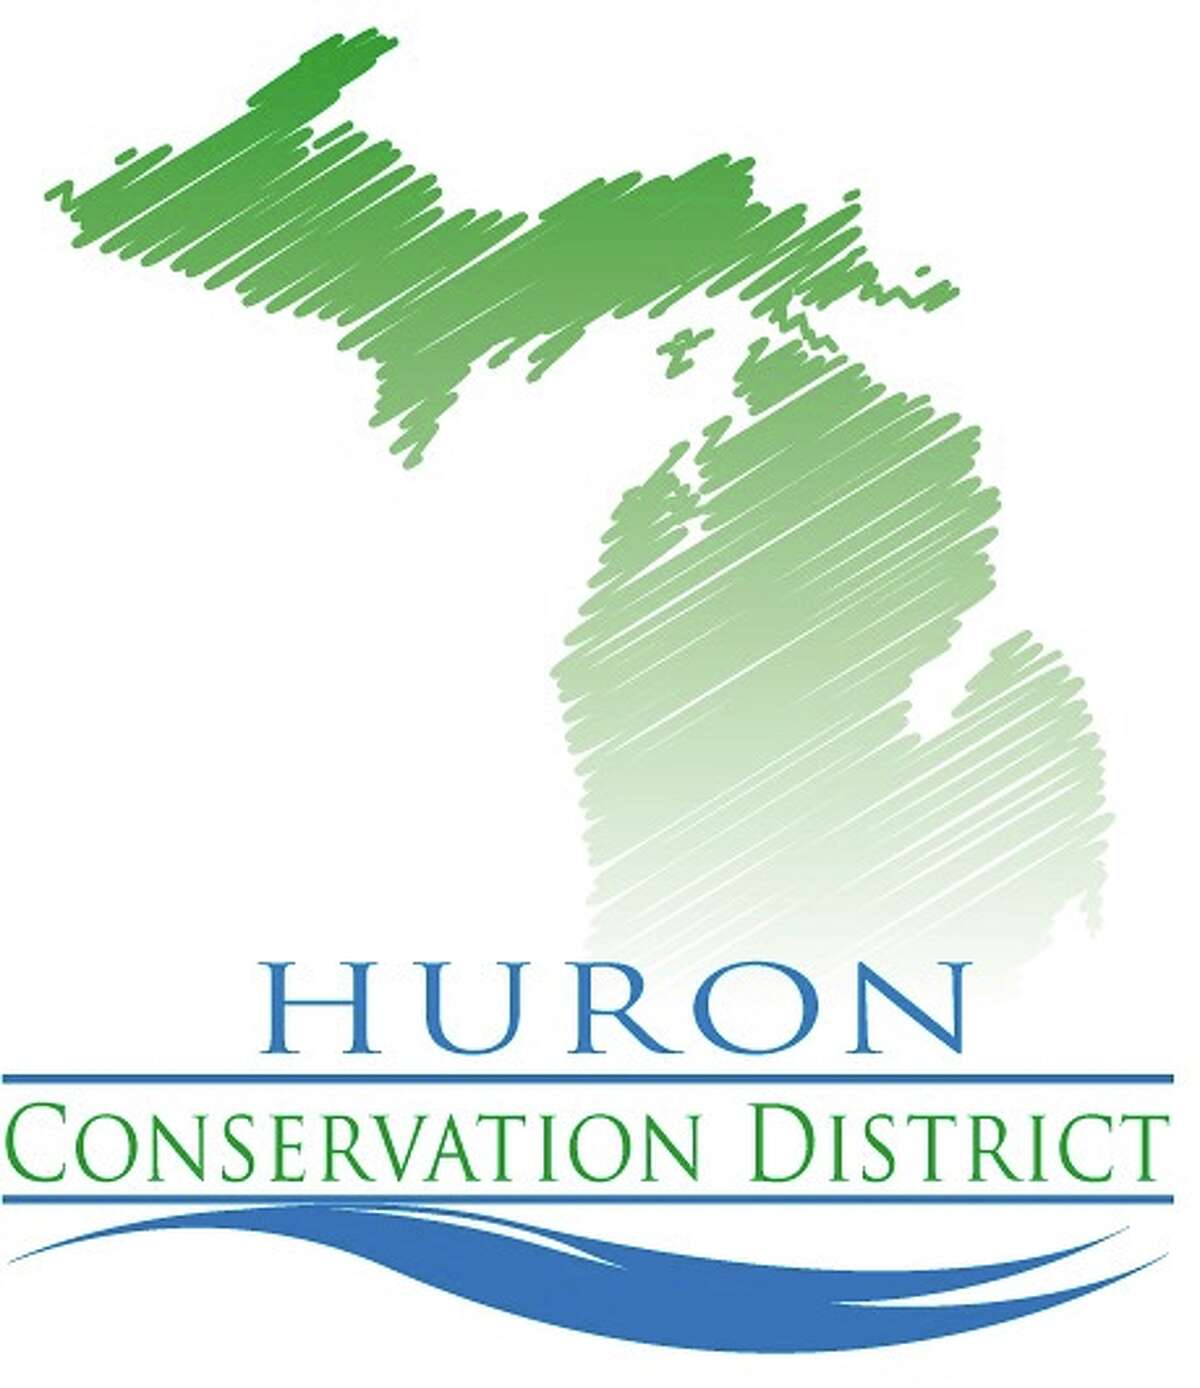 The Conservation District continues its goal of improving water quality in Saginaw Bay.